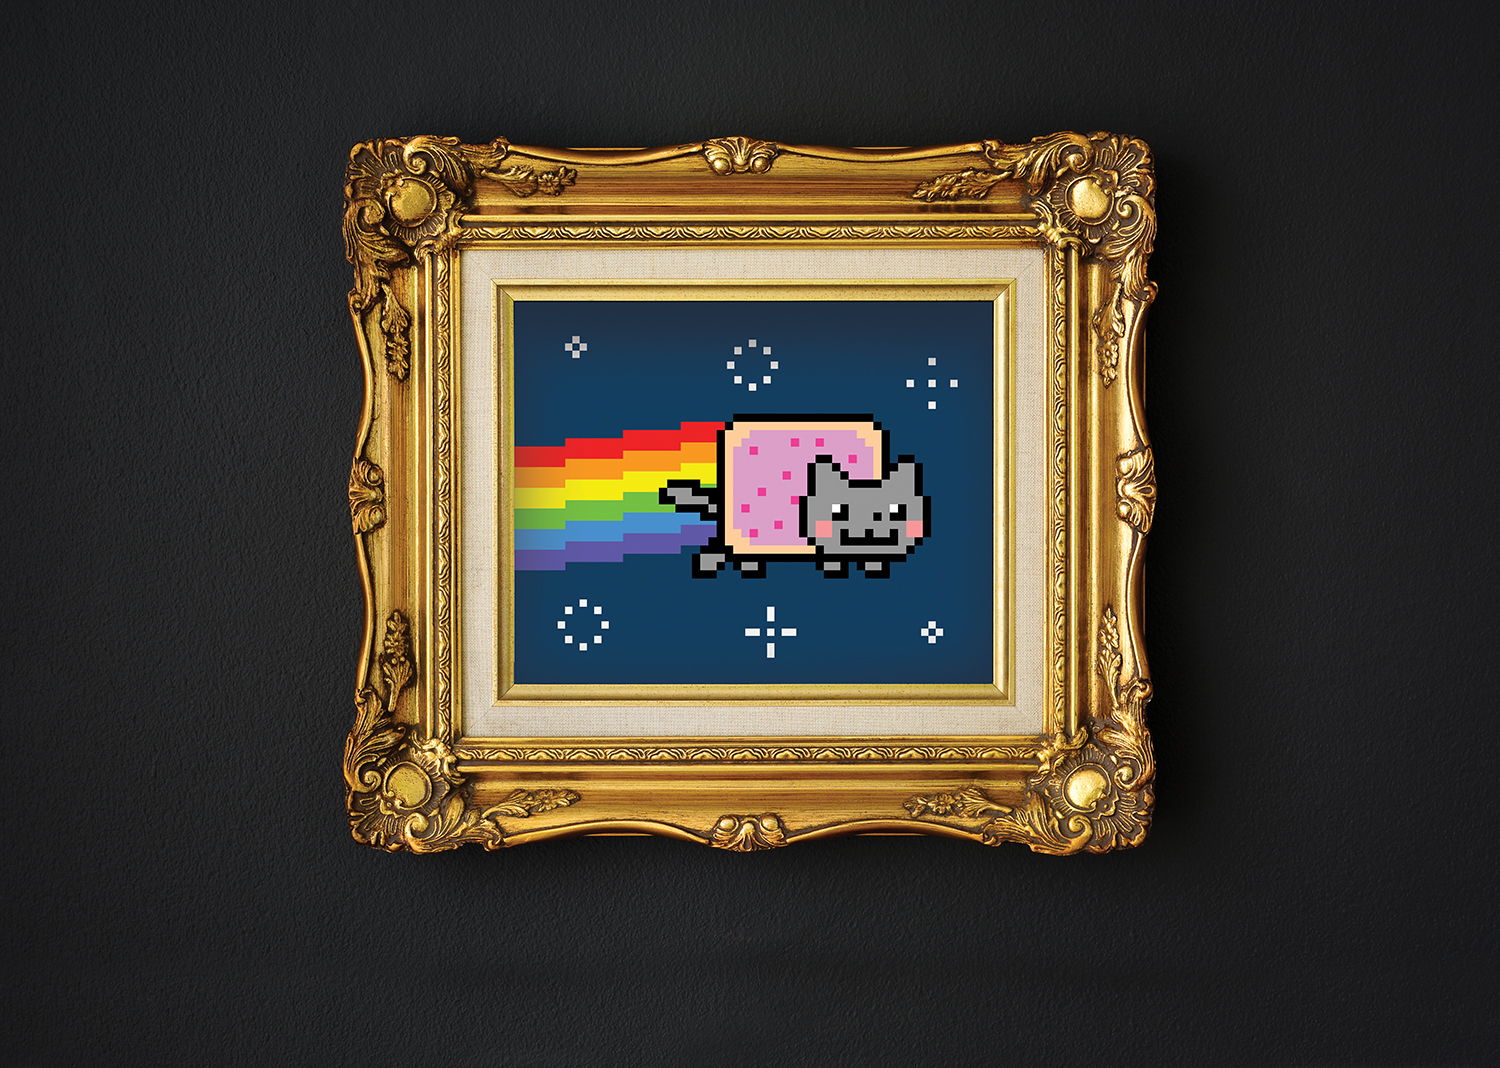 The internet-famous Nyan Cat in a gilded frame